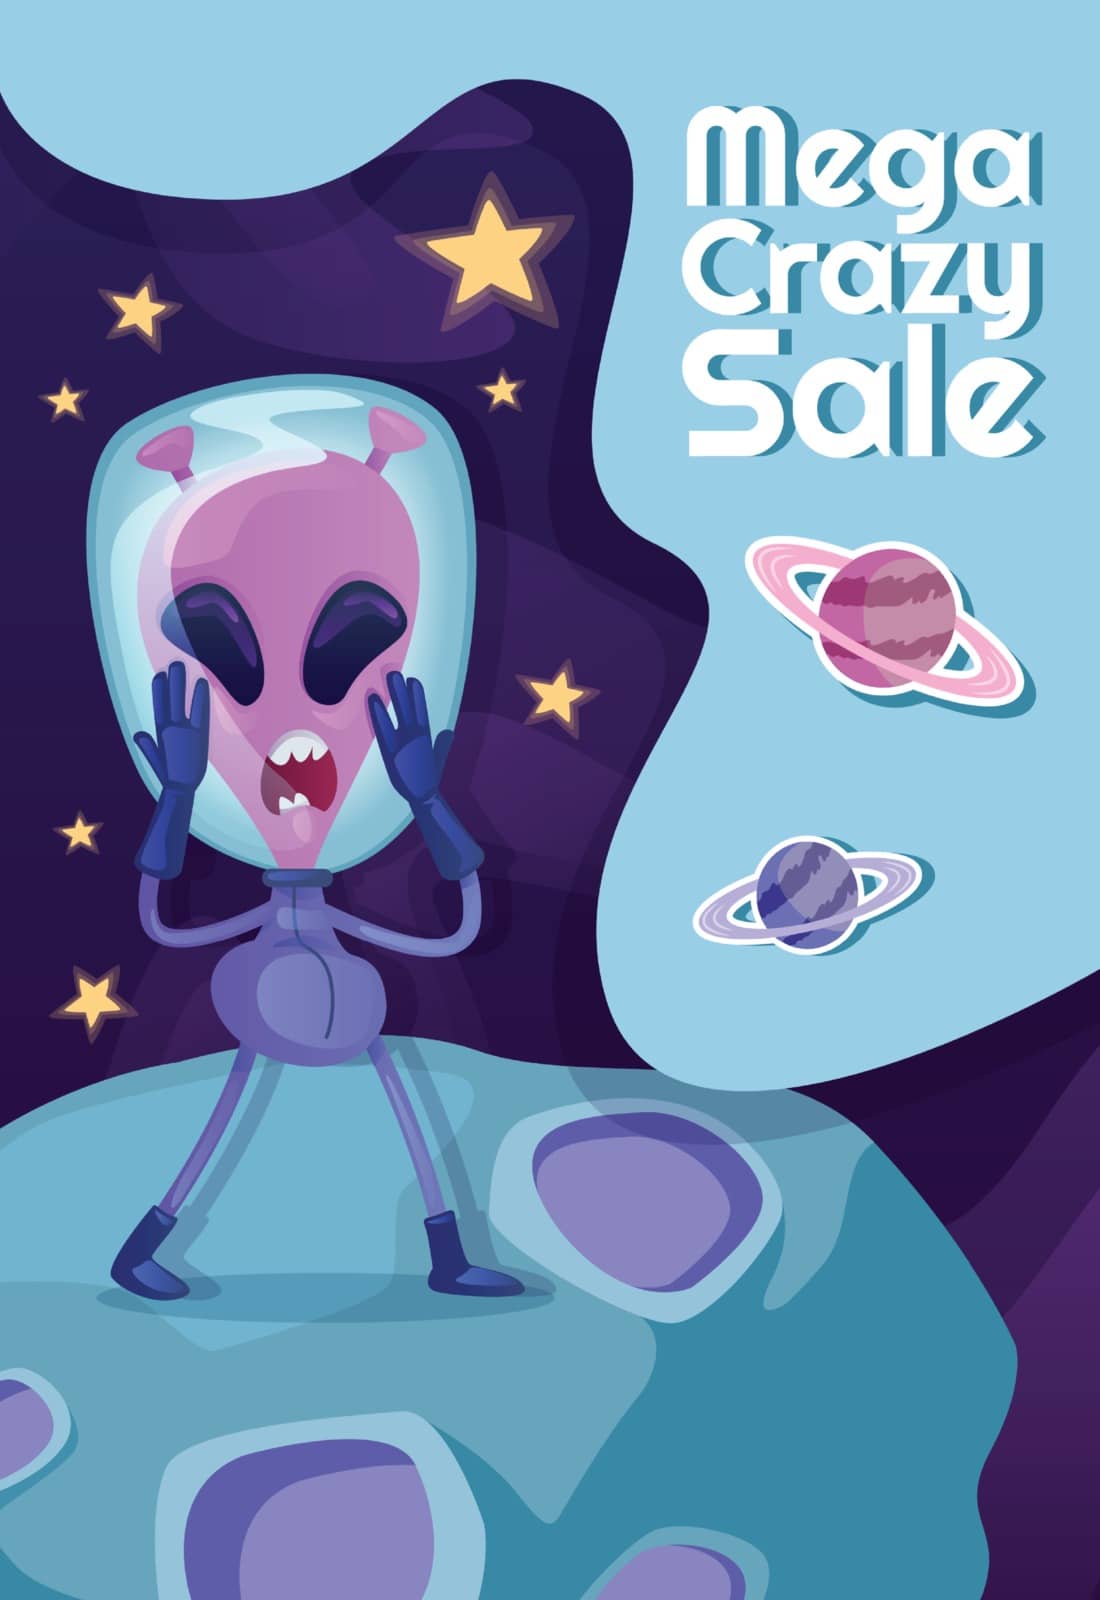 Mega crazy sale poster flat vector template. Emotional martian, amazed extraterrestrial. Brochure, booklet one page concept design with cartoon characters. Discount advertising flyer, leaflet